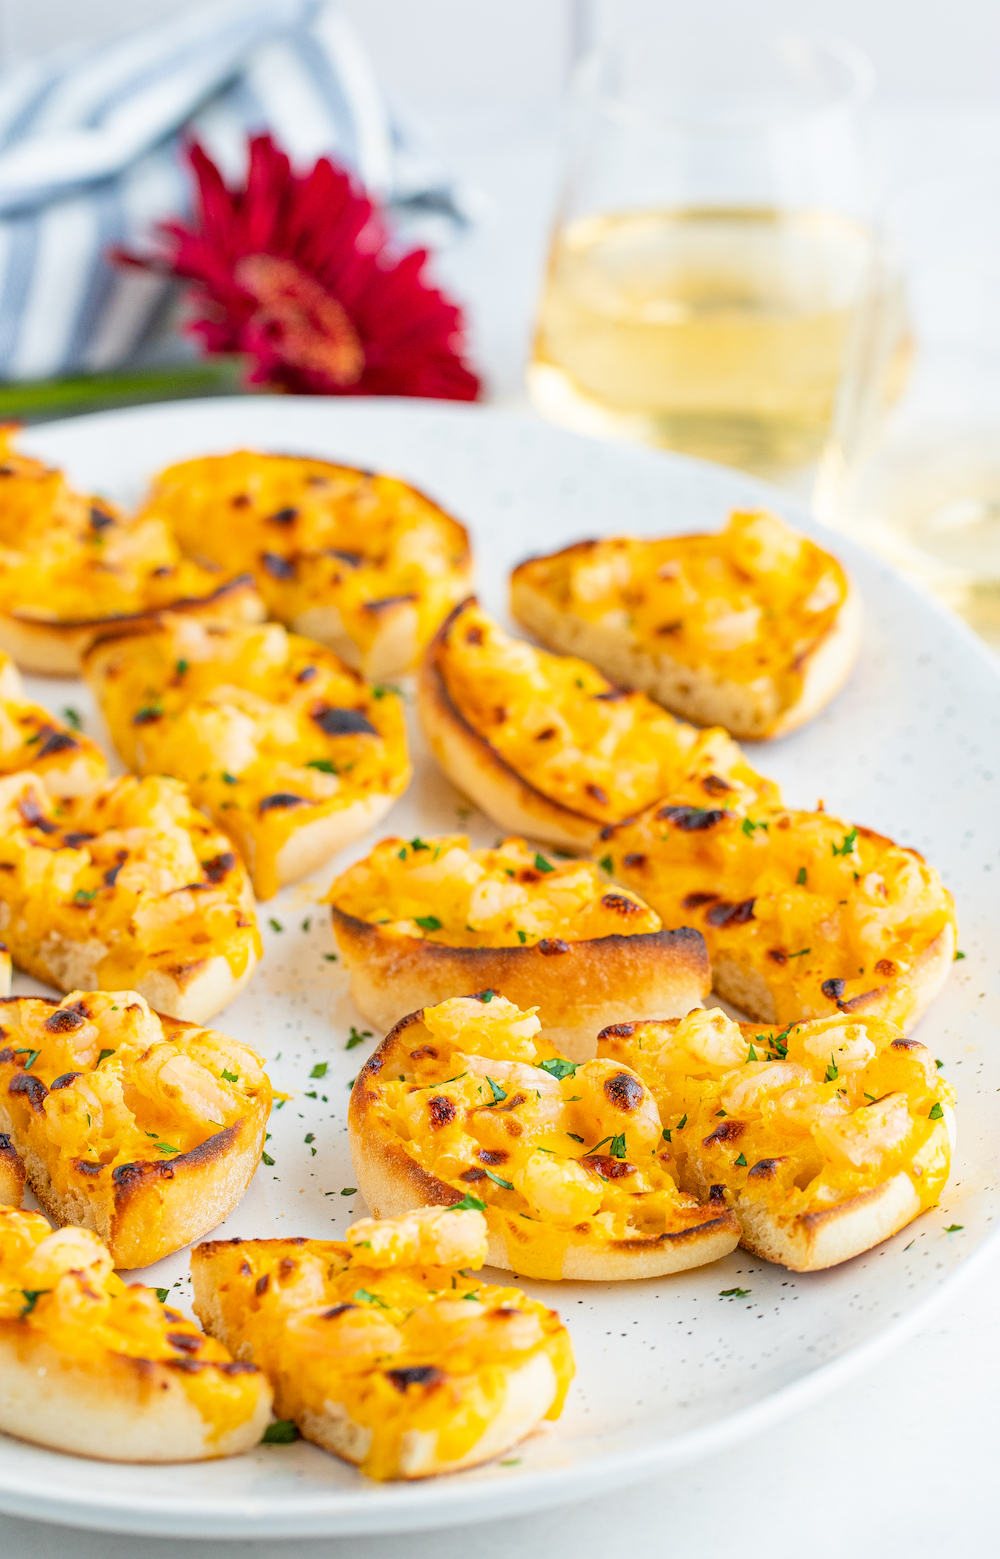 An easy appetizer with shrimp and cheese.